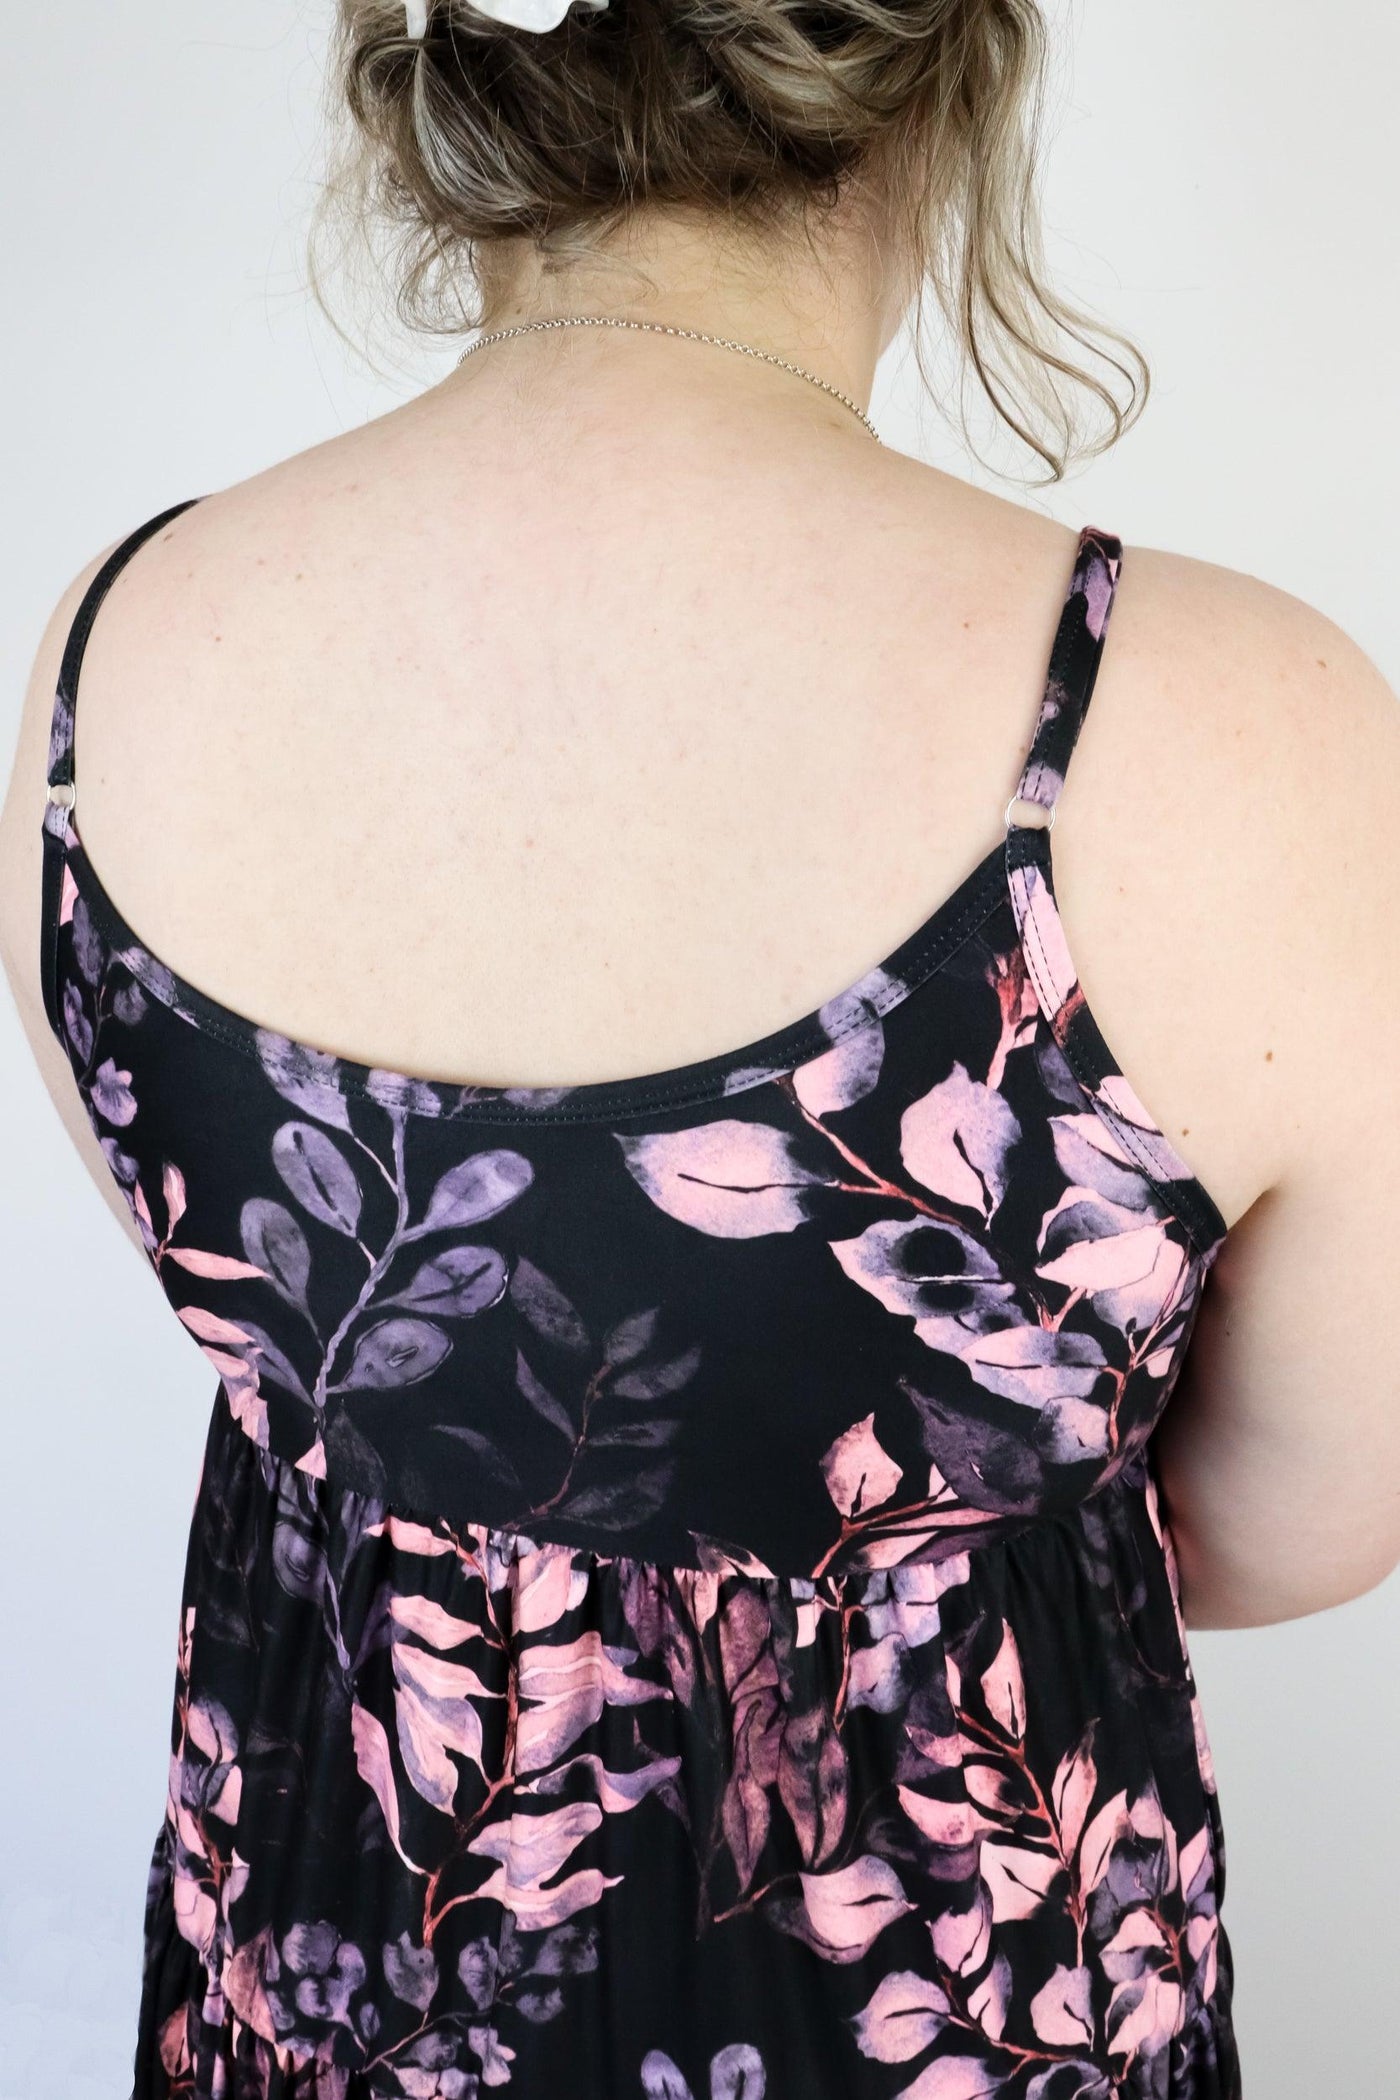 Vintage Watercolour Leaves - Strappy Maxi Dress - Pockets - Pawlie